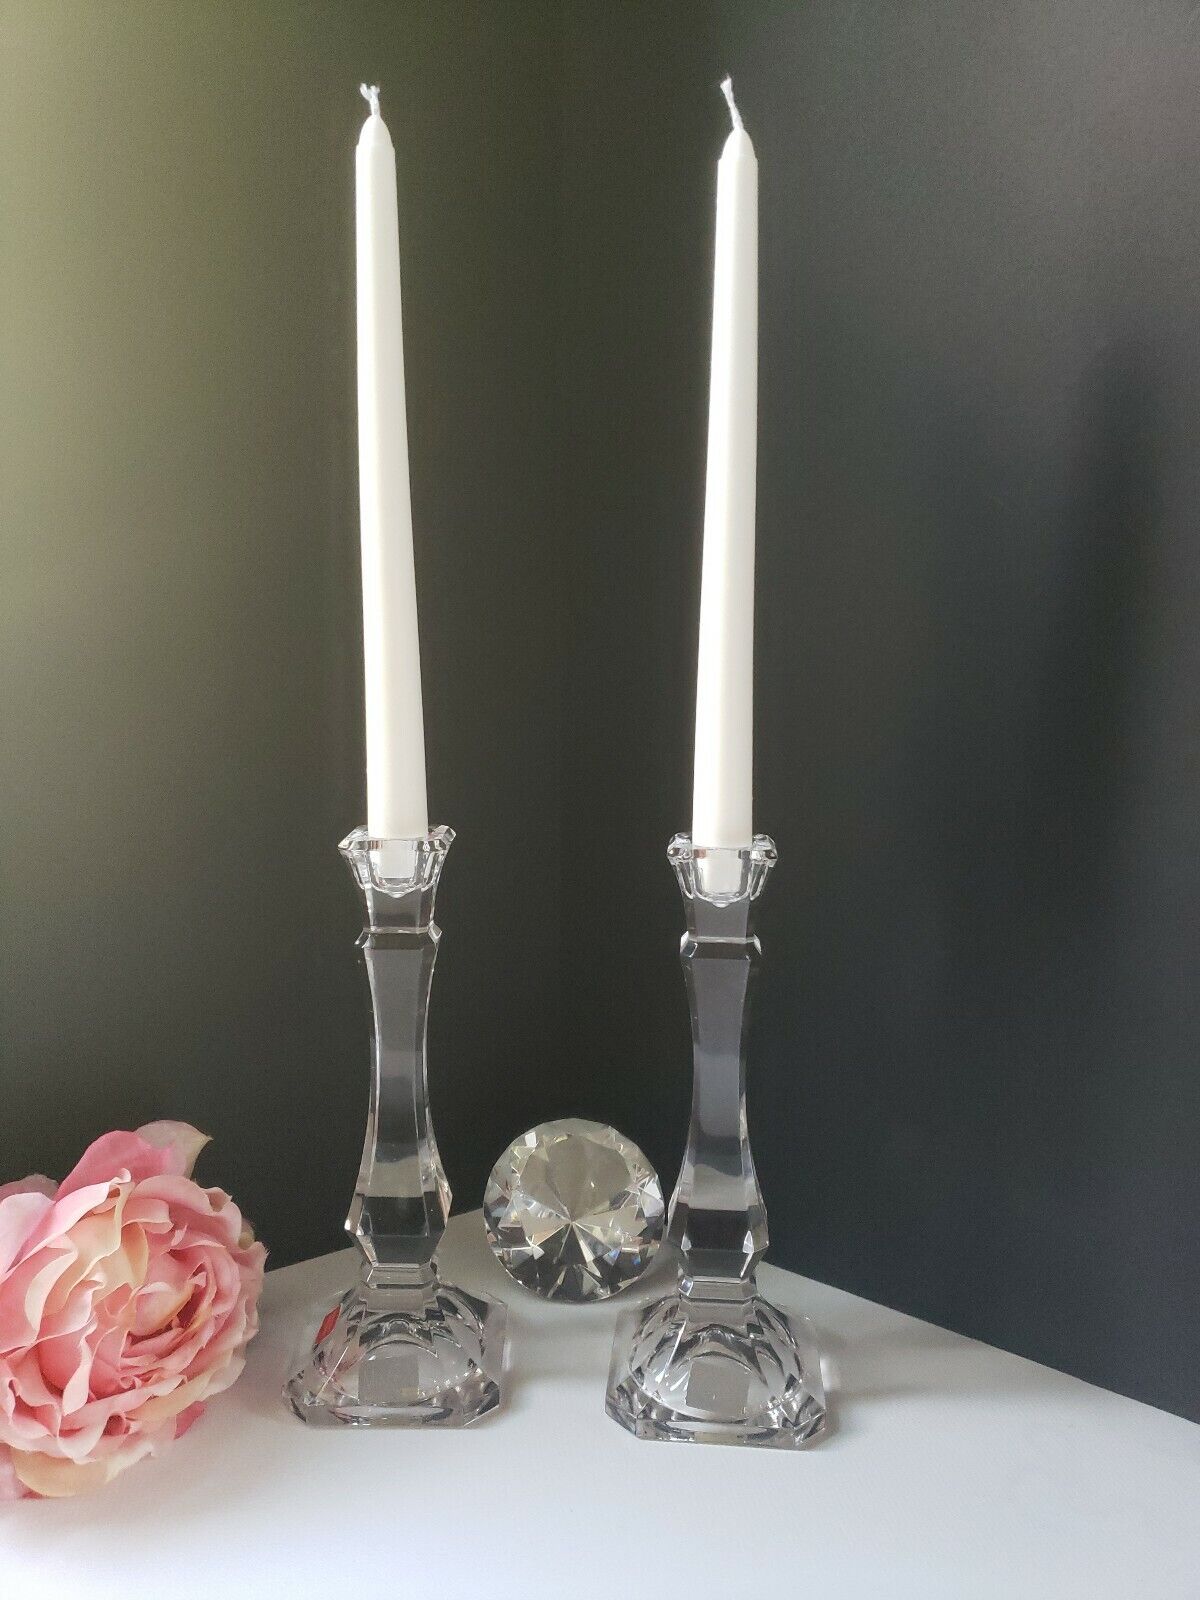 Mikasa - Pair of Lead Crystal Candle Holders  Made in Austria - NEW/DISPLAY ITEM Mikasa - фотография #7